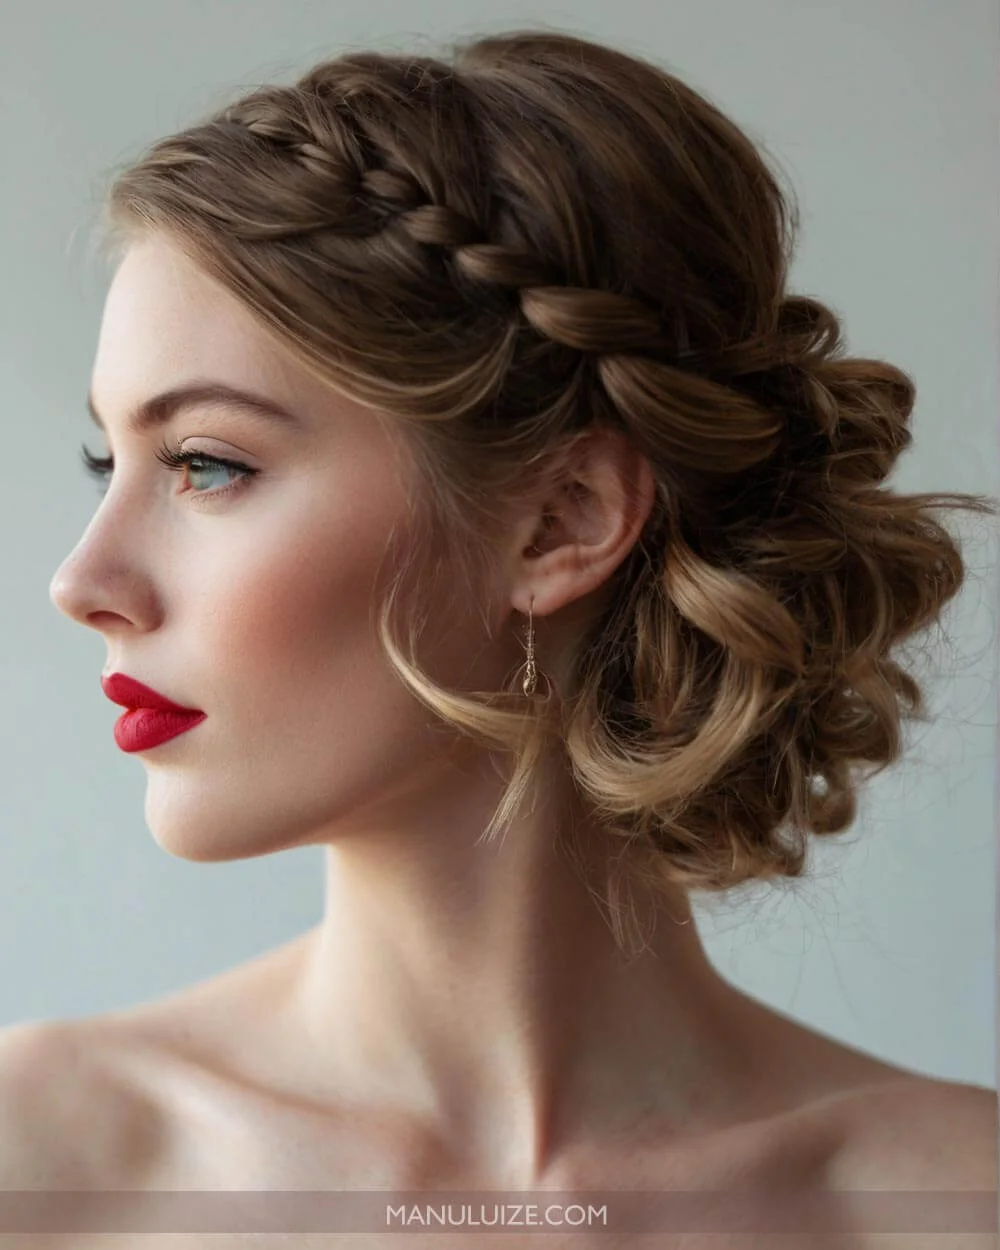 Short hairstyle with braids